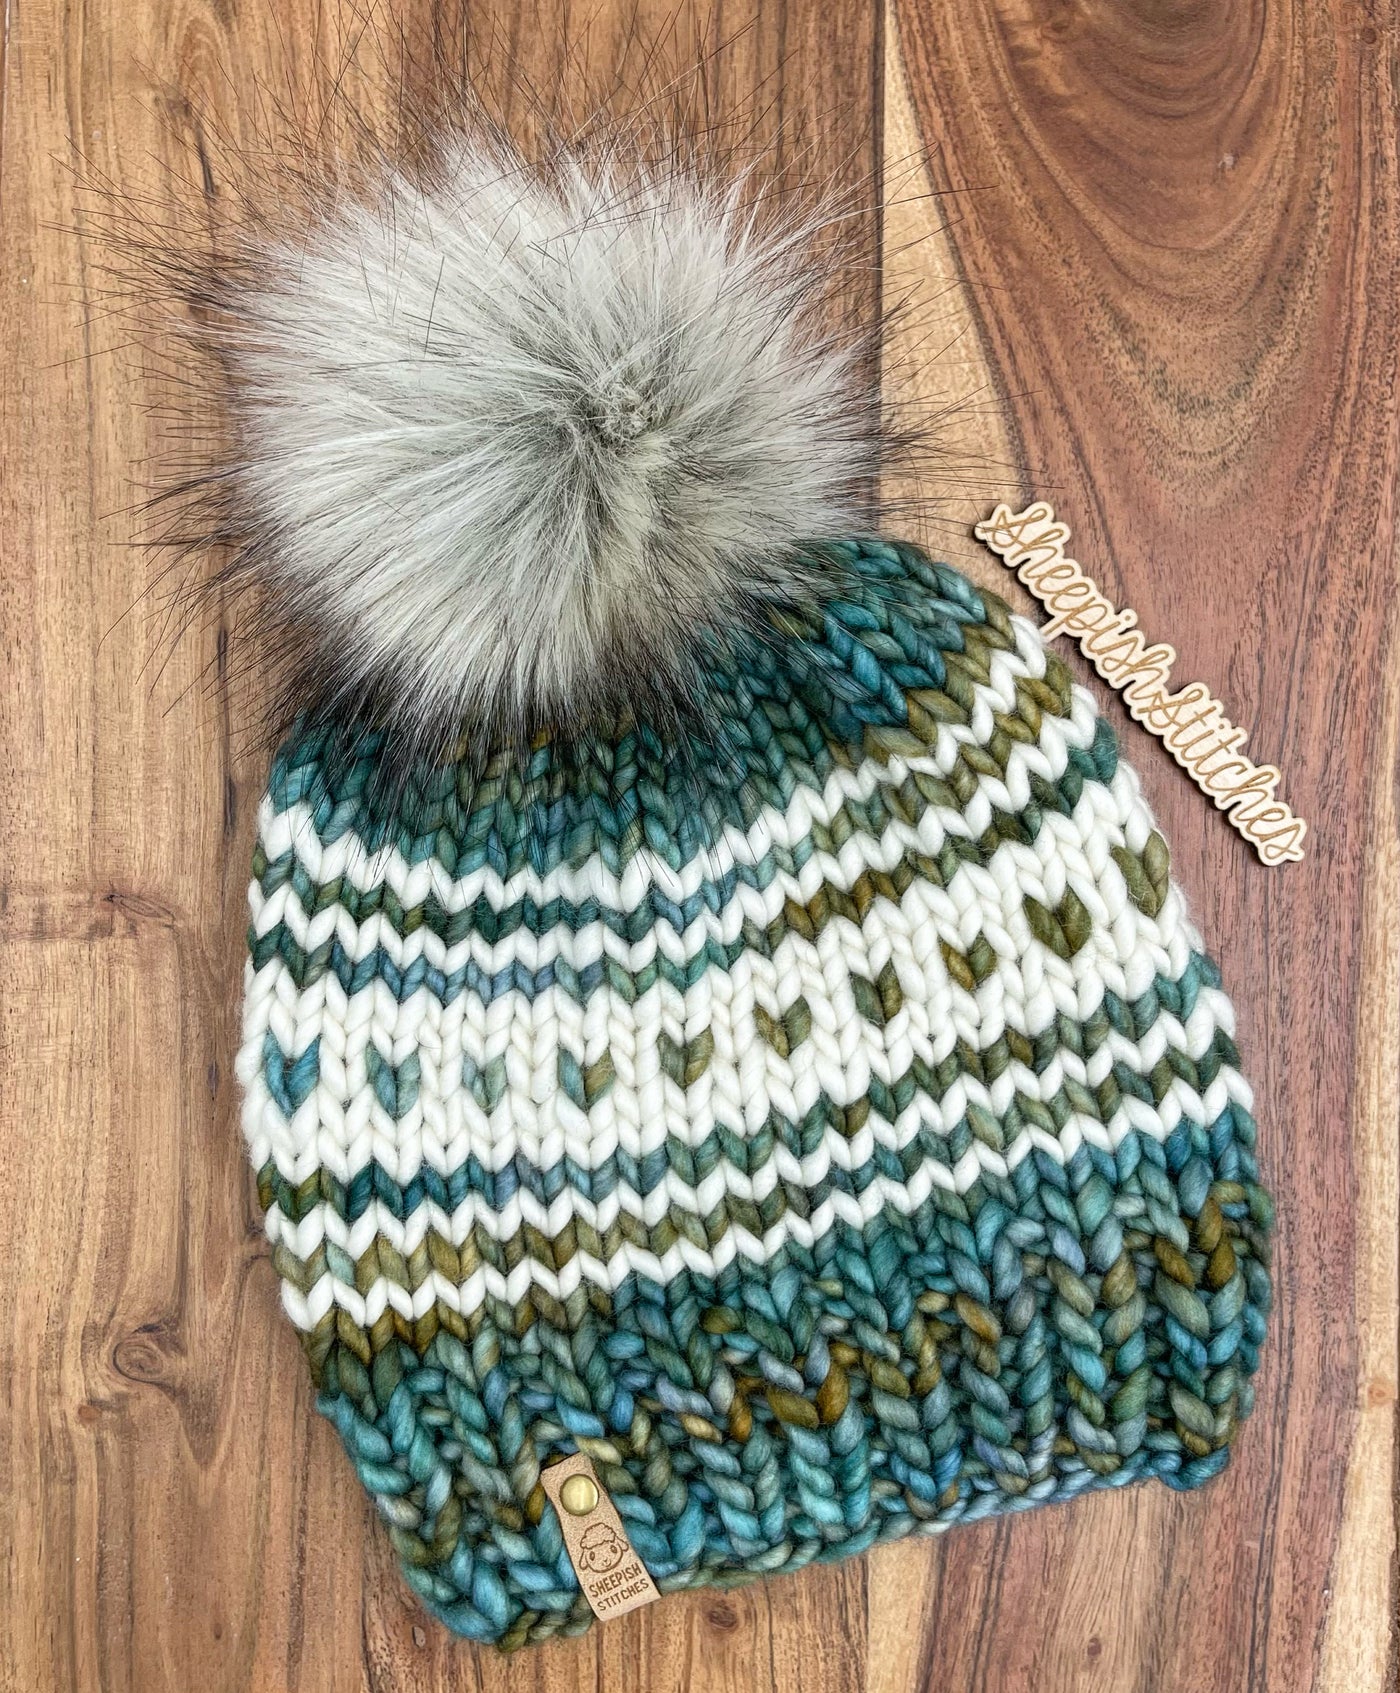 Green tones with ivory accent - Merino Wool Knit Hat with Faux Fur Pom Pom, Hand Knit Luxury Beanie, Ethically Sourced Merino Wool Toque